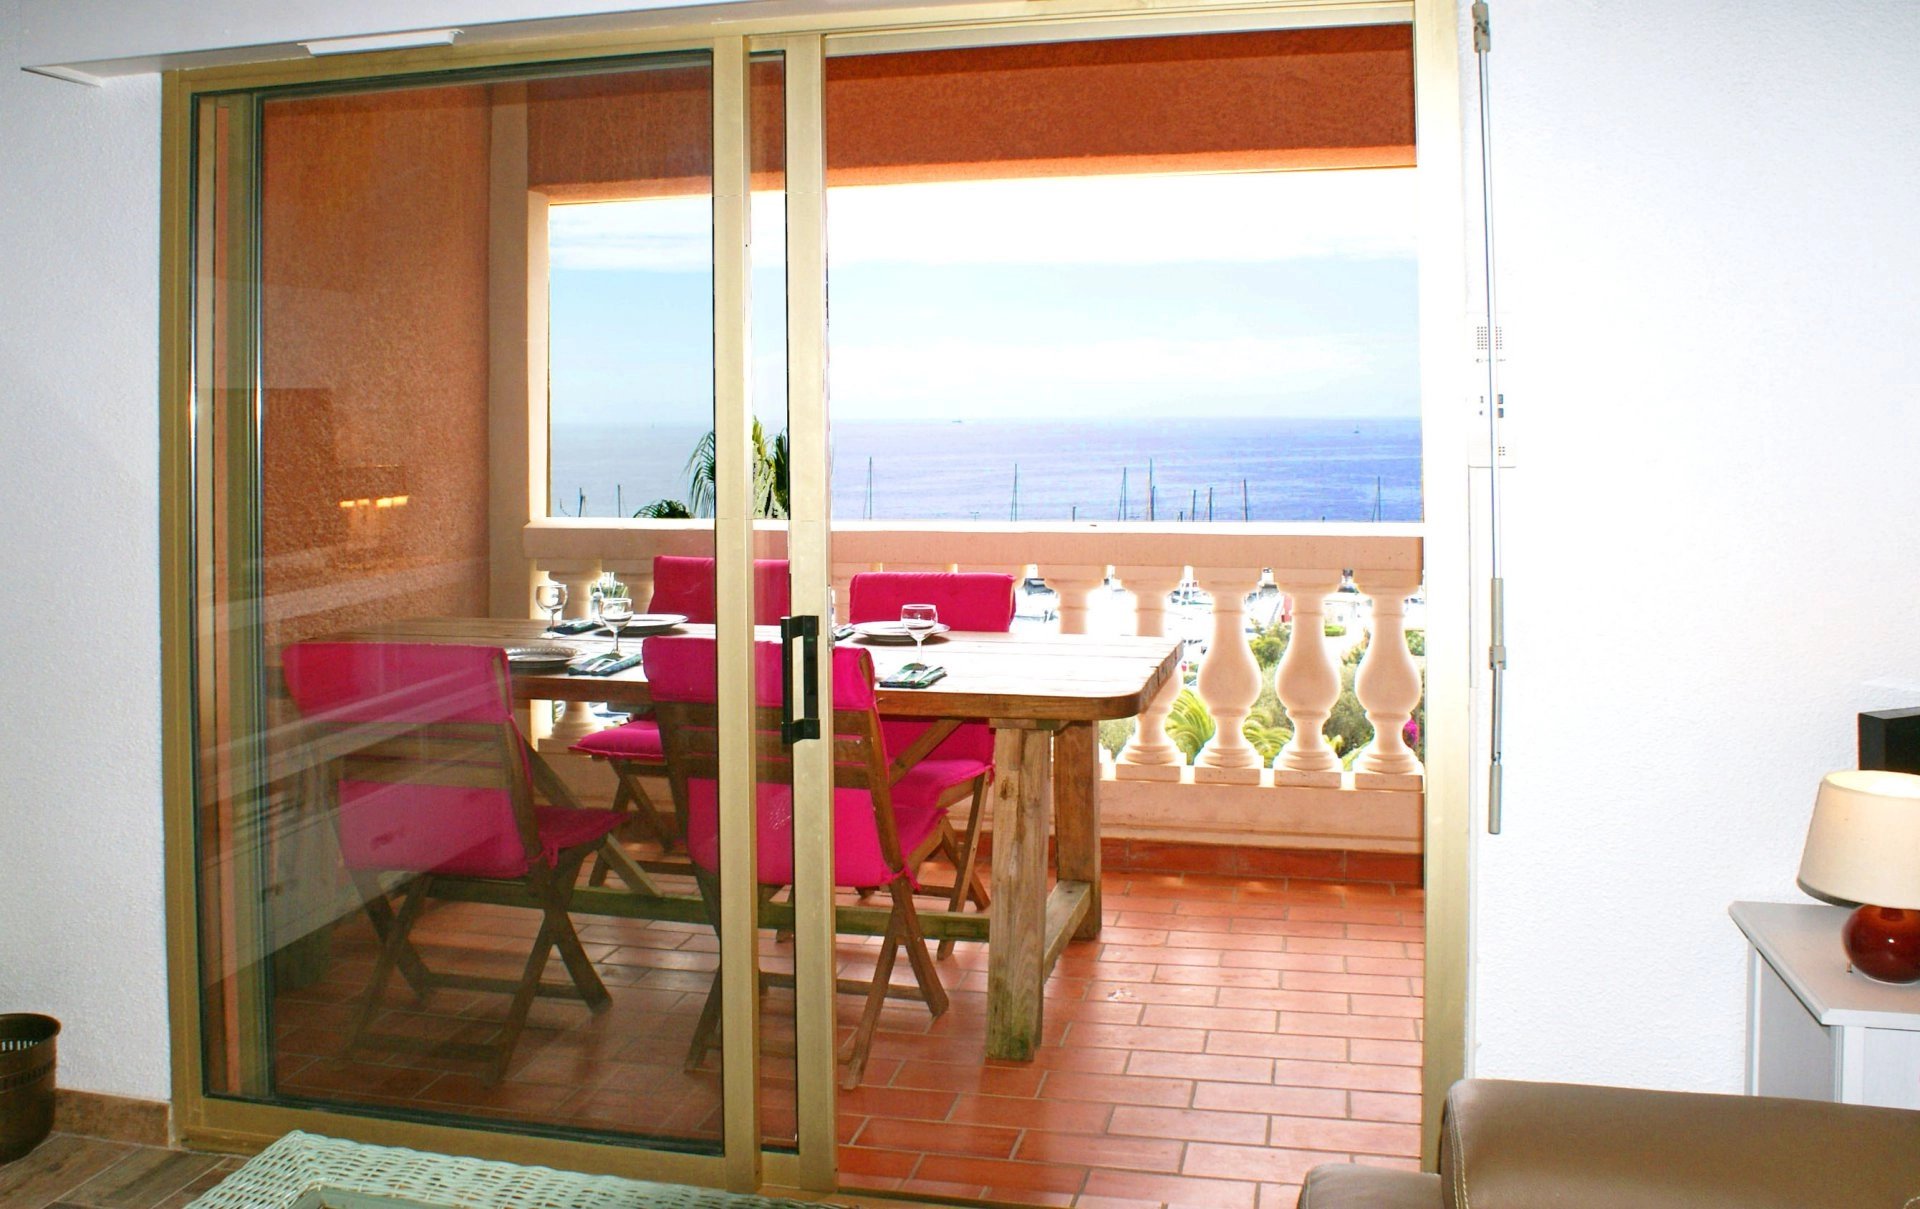 iving room, 2  bed rooms terrasse with sea view open plan kitchen bath room/wc only a few steps from the beach  * BM C11 *